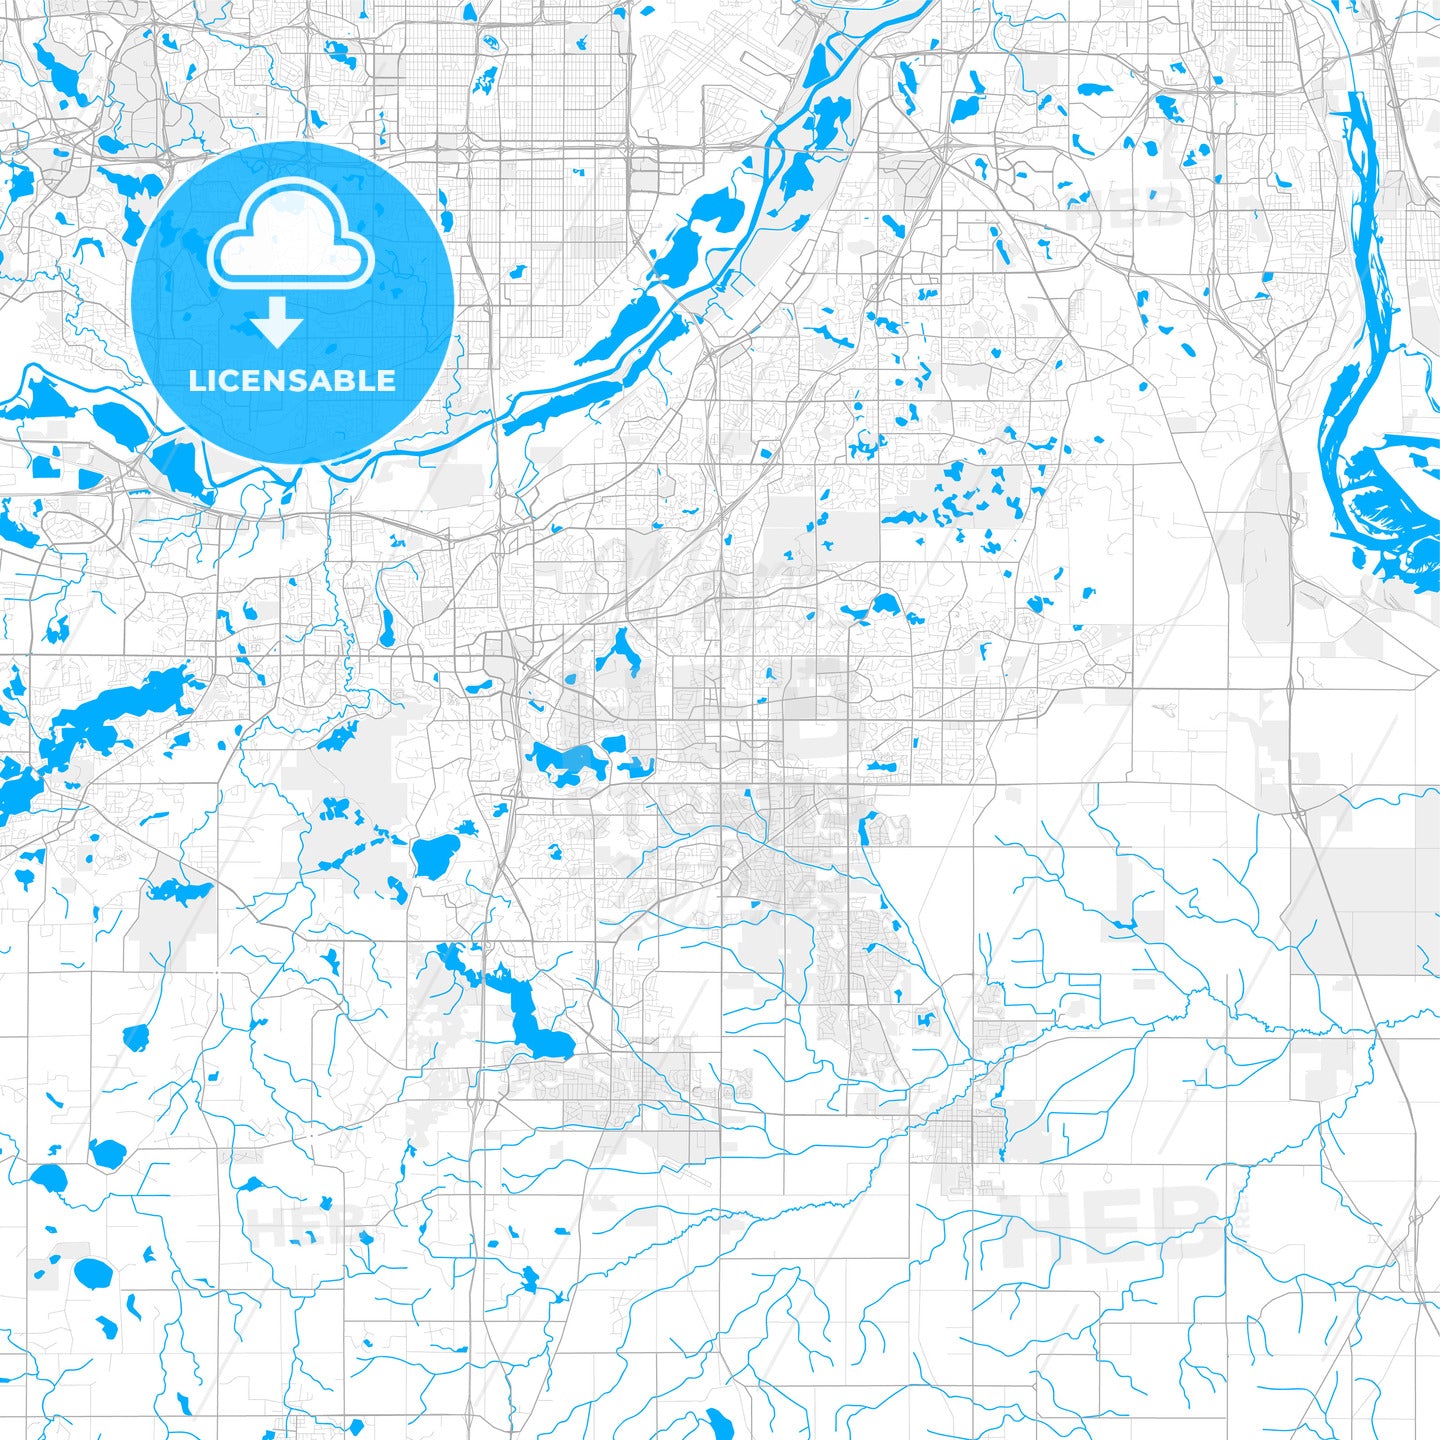 Rich detailed vector map of Apple Valley, Minnesota, United States of America